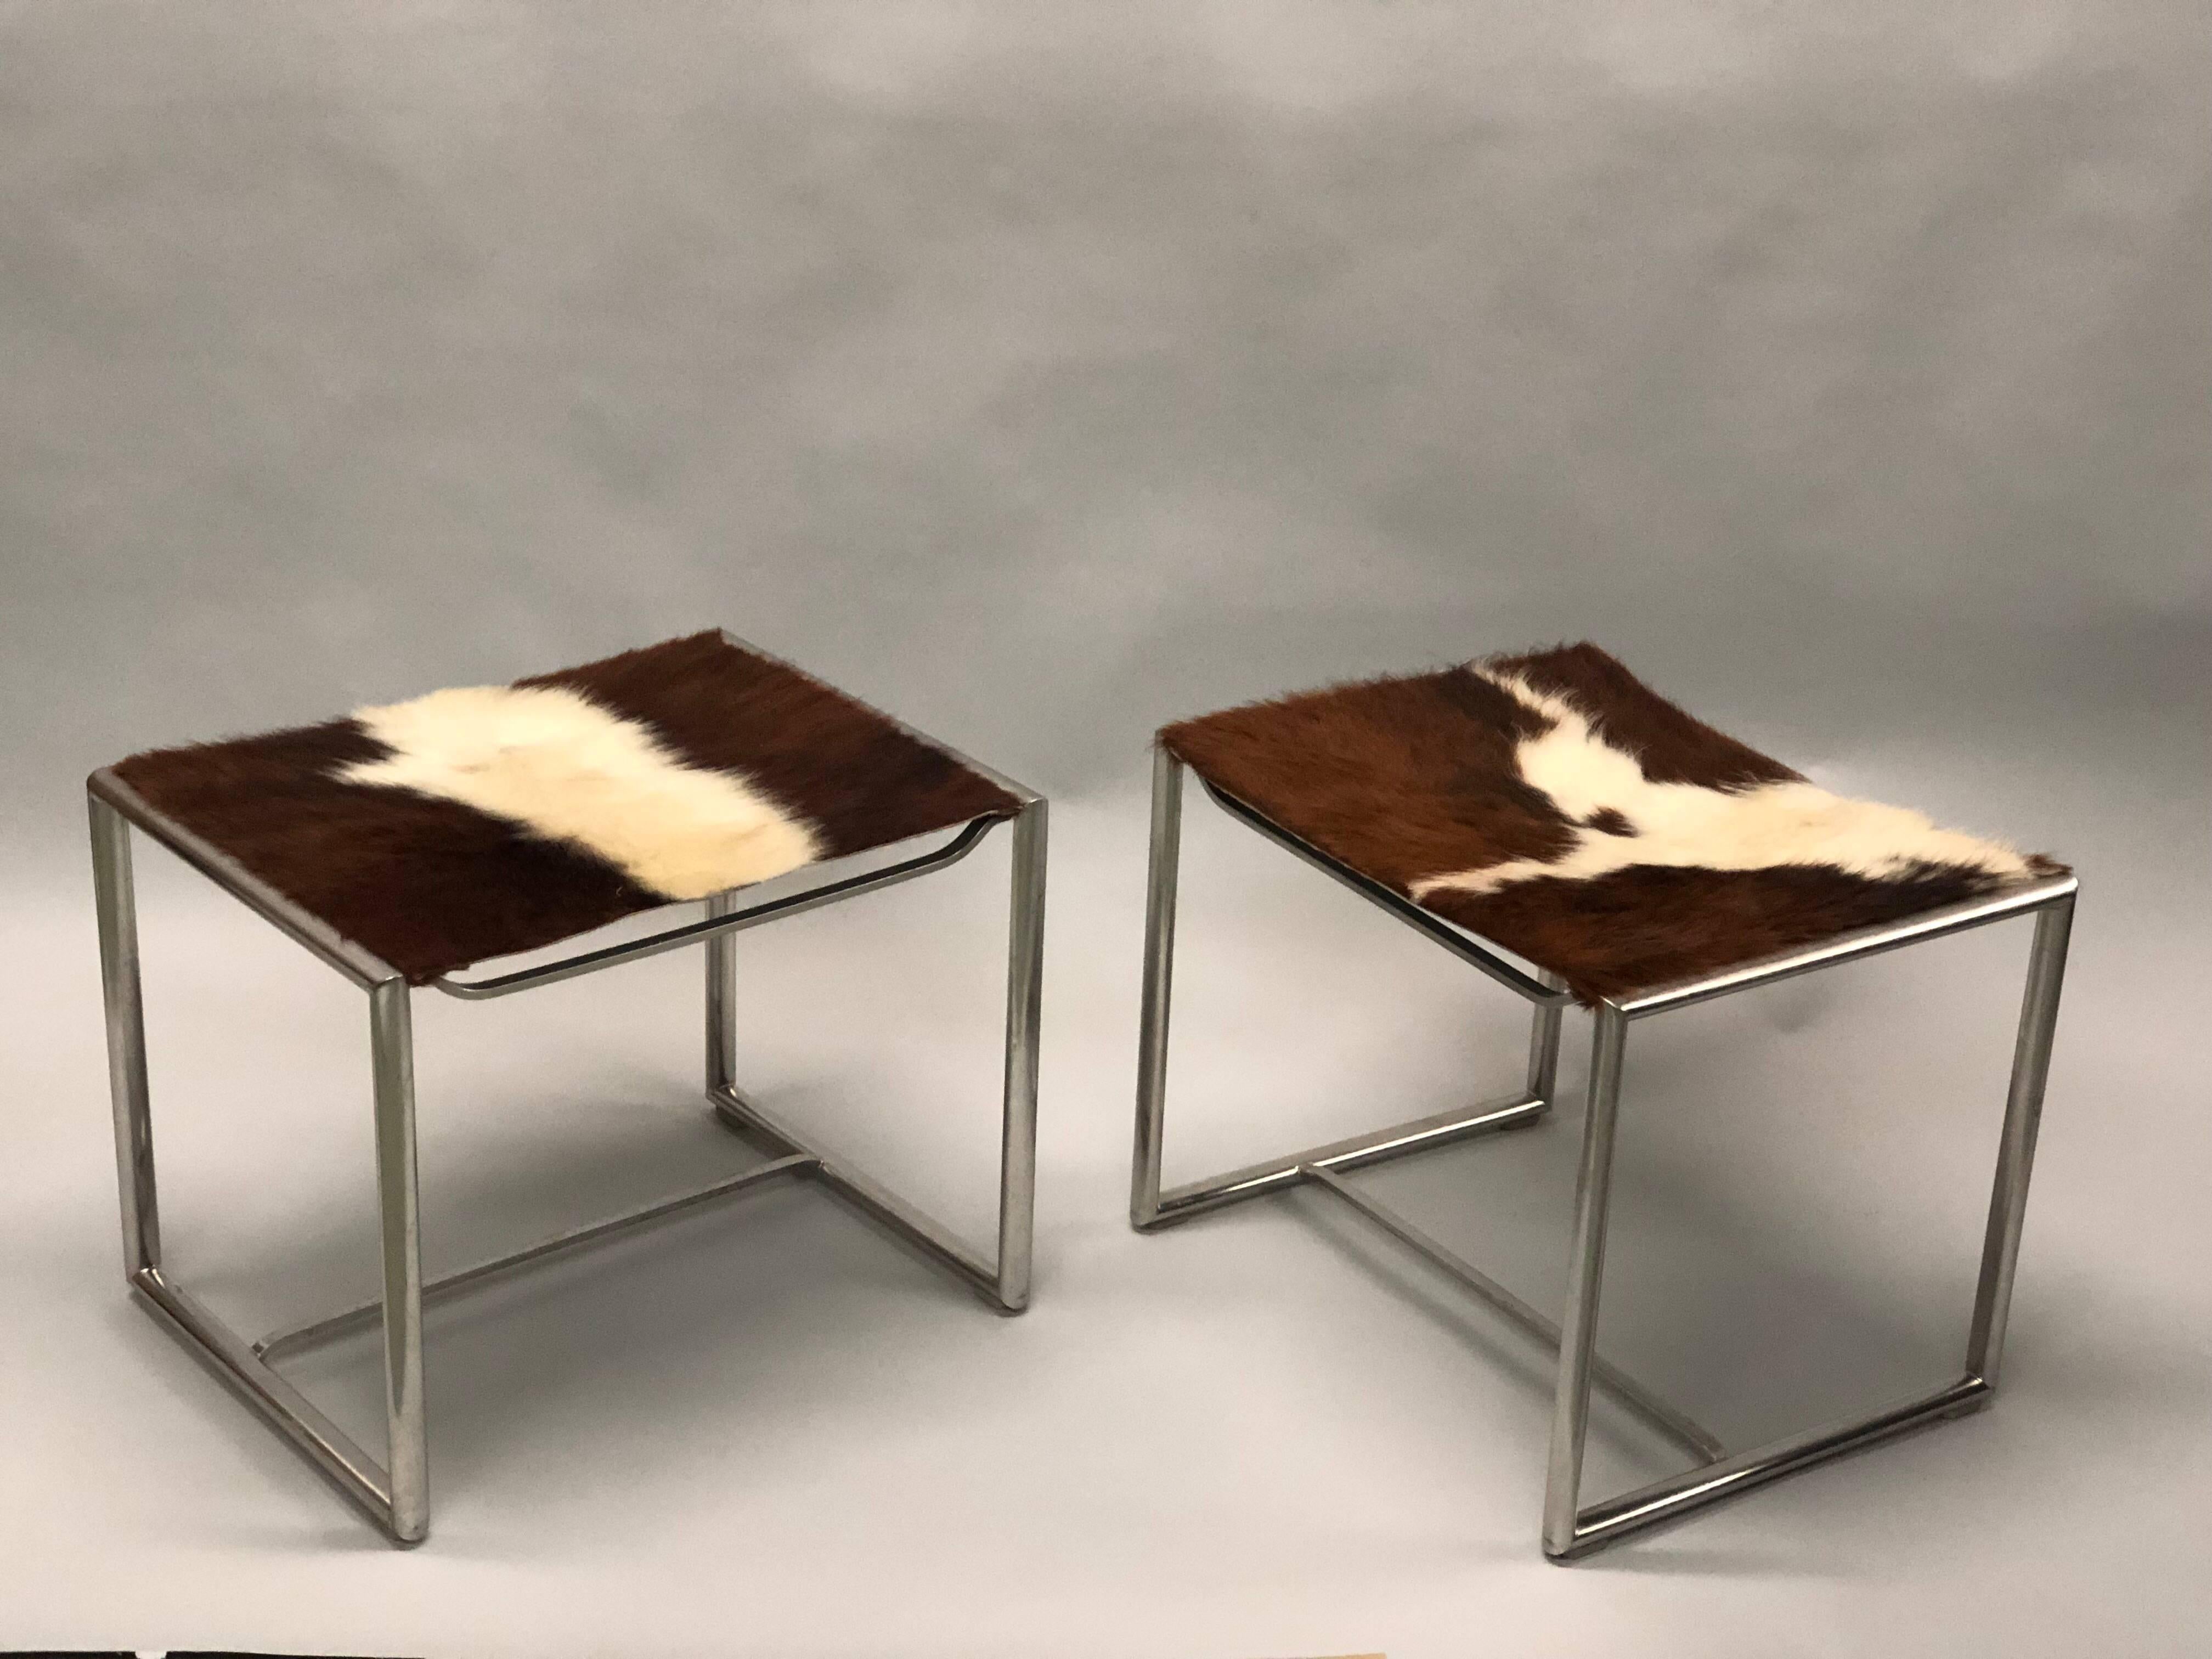 Elegant pair of French Mid-Century Modern benches or stools in nickel tubular steel with cowhide seats attributed to Marcel Breuer.

References: Le Corbusier, Gyorgy Kepes, Marcel Breuer, Ludwig Mies Van Der Rohe, Laszlo Moholy Nagy.